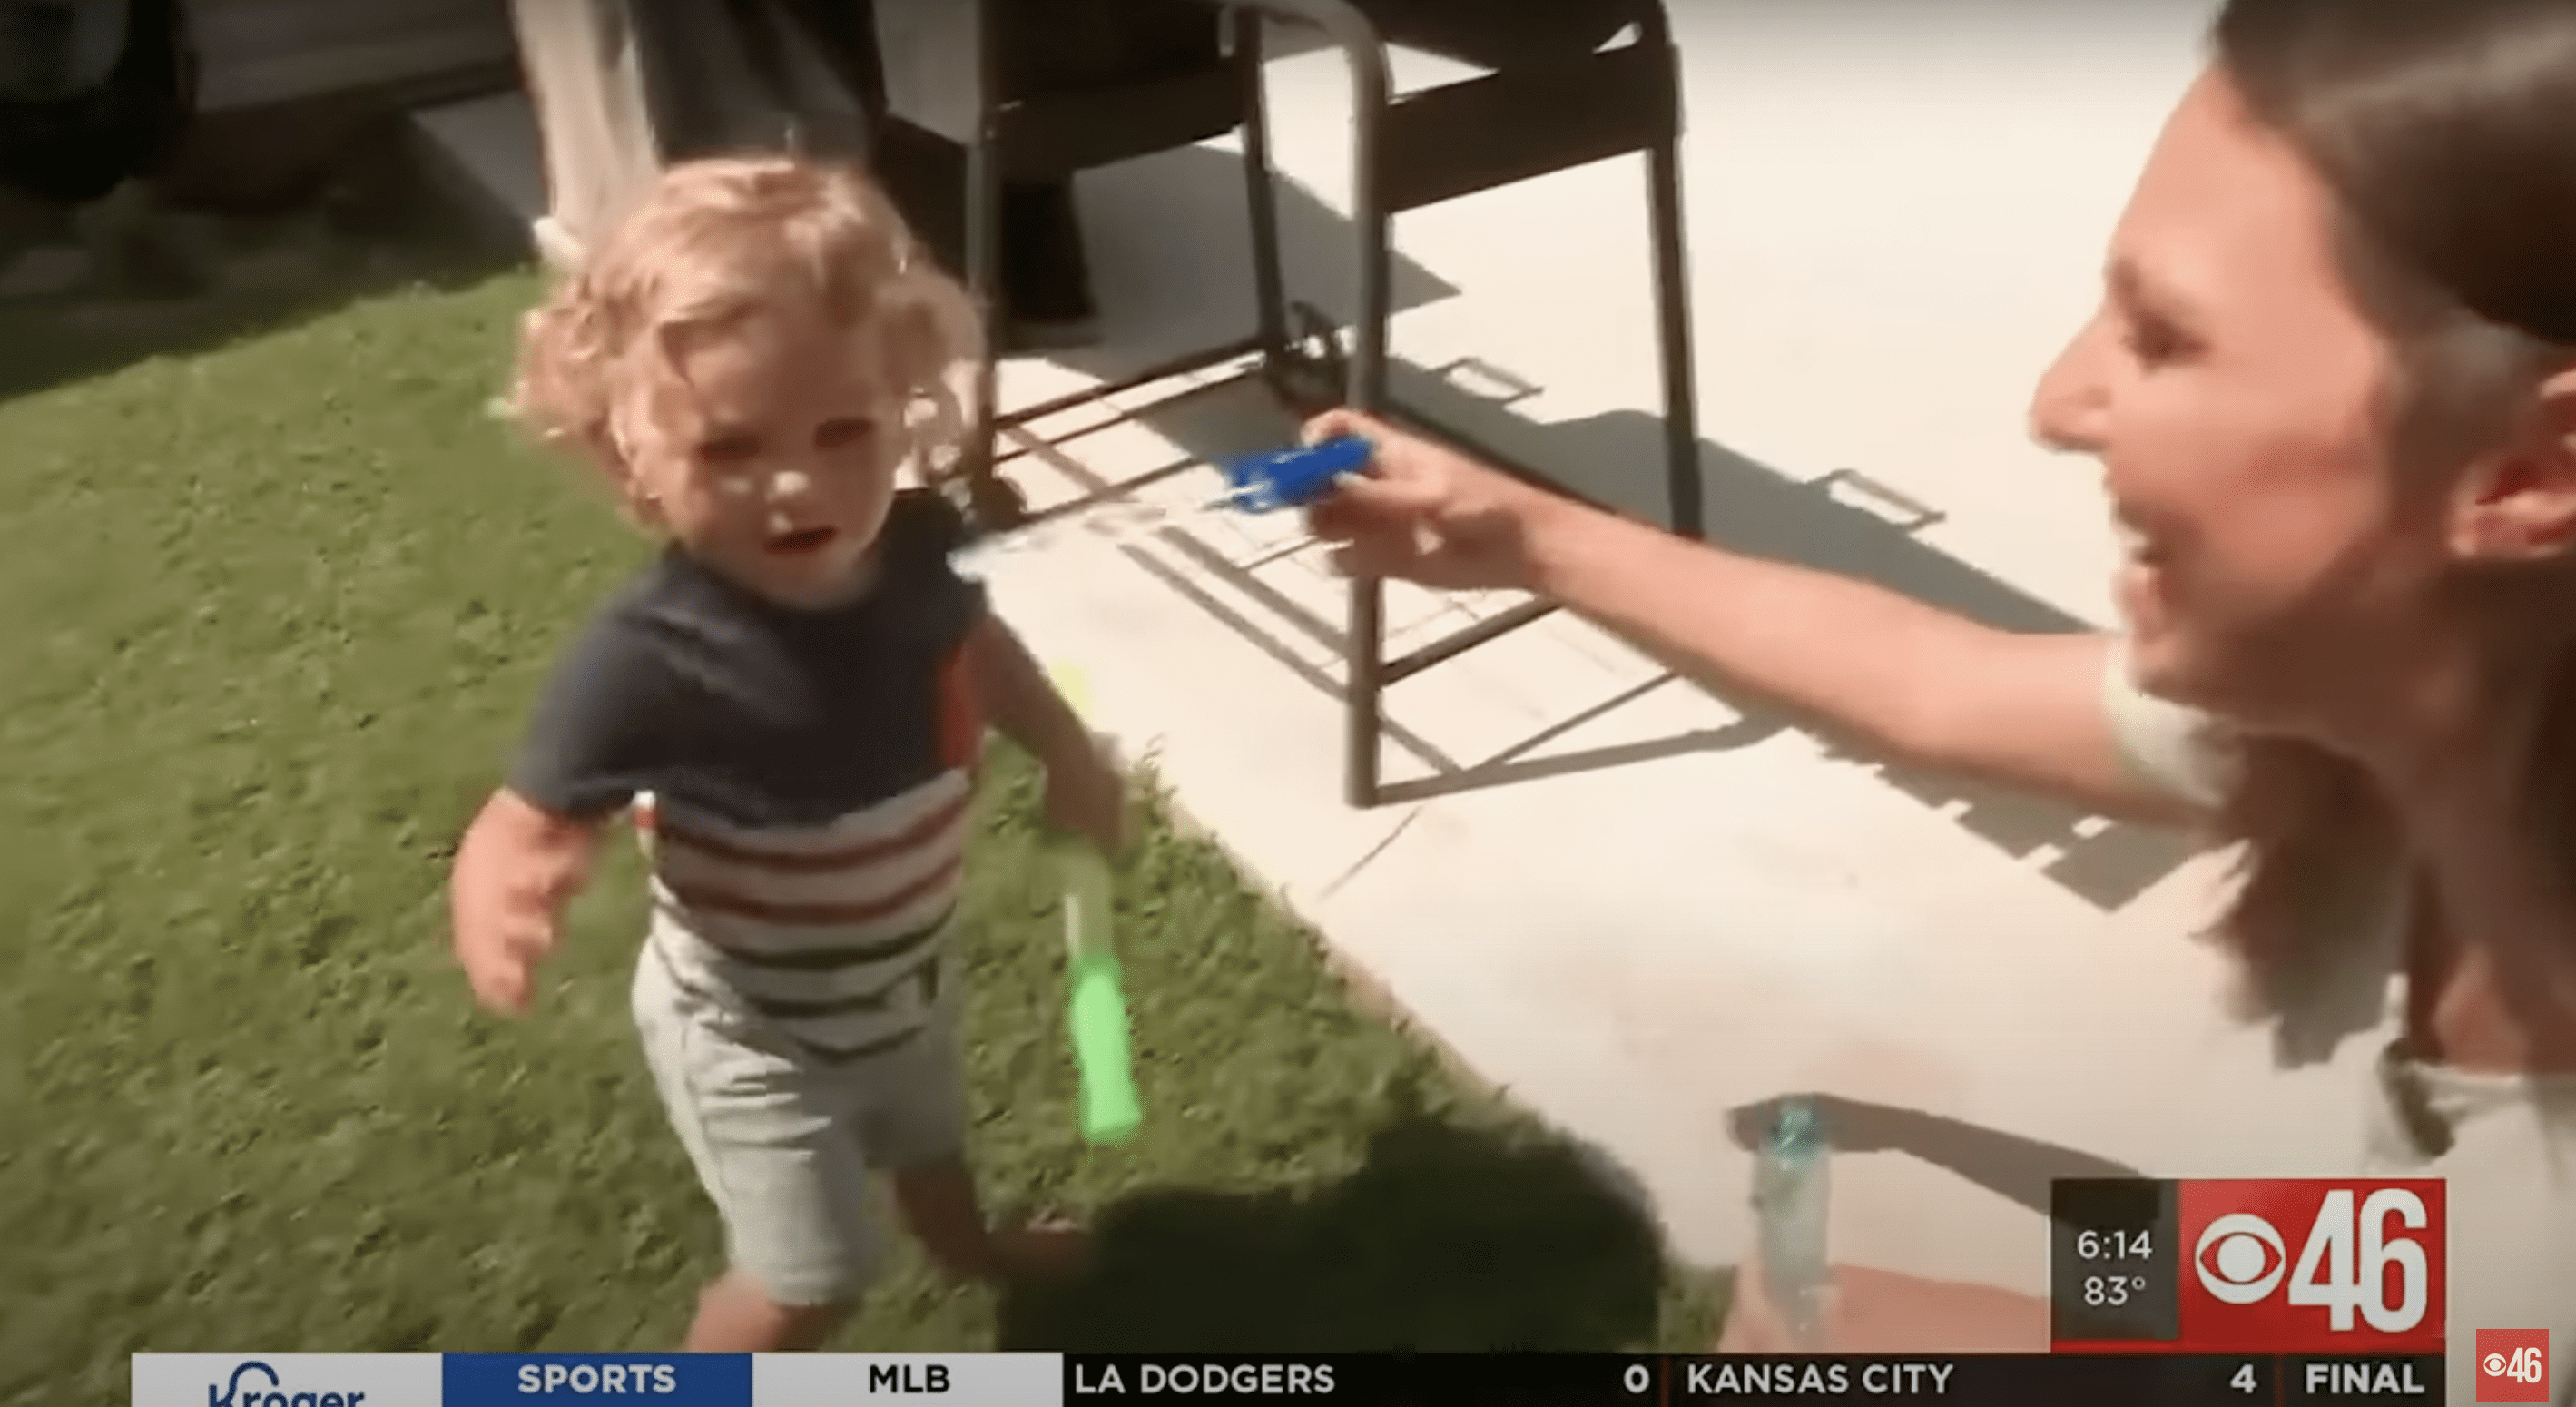 Ethan and his mom, Brittany, are pictured playing with bubbles. | Source: YouTube.com/CBS46 Atlanta